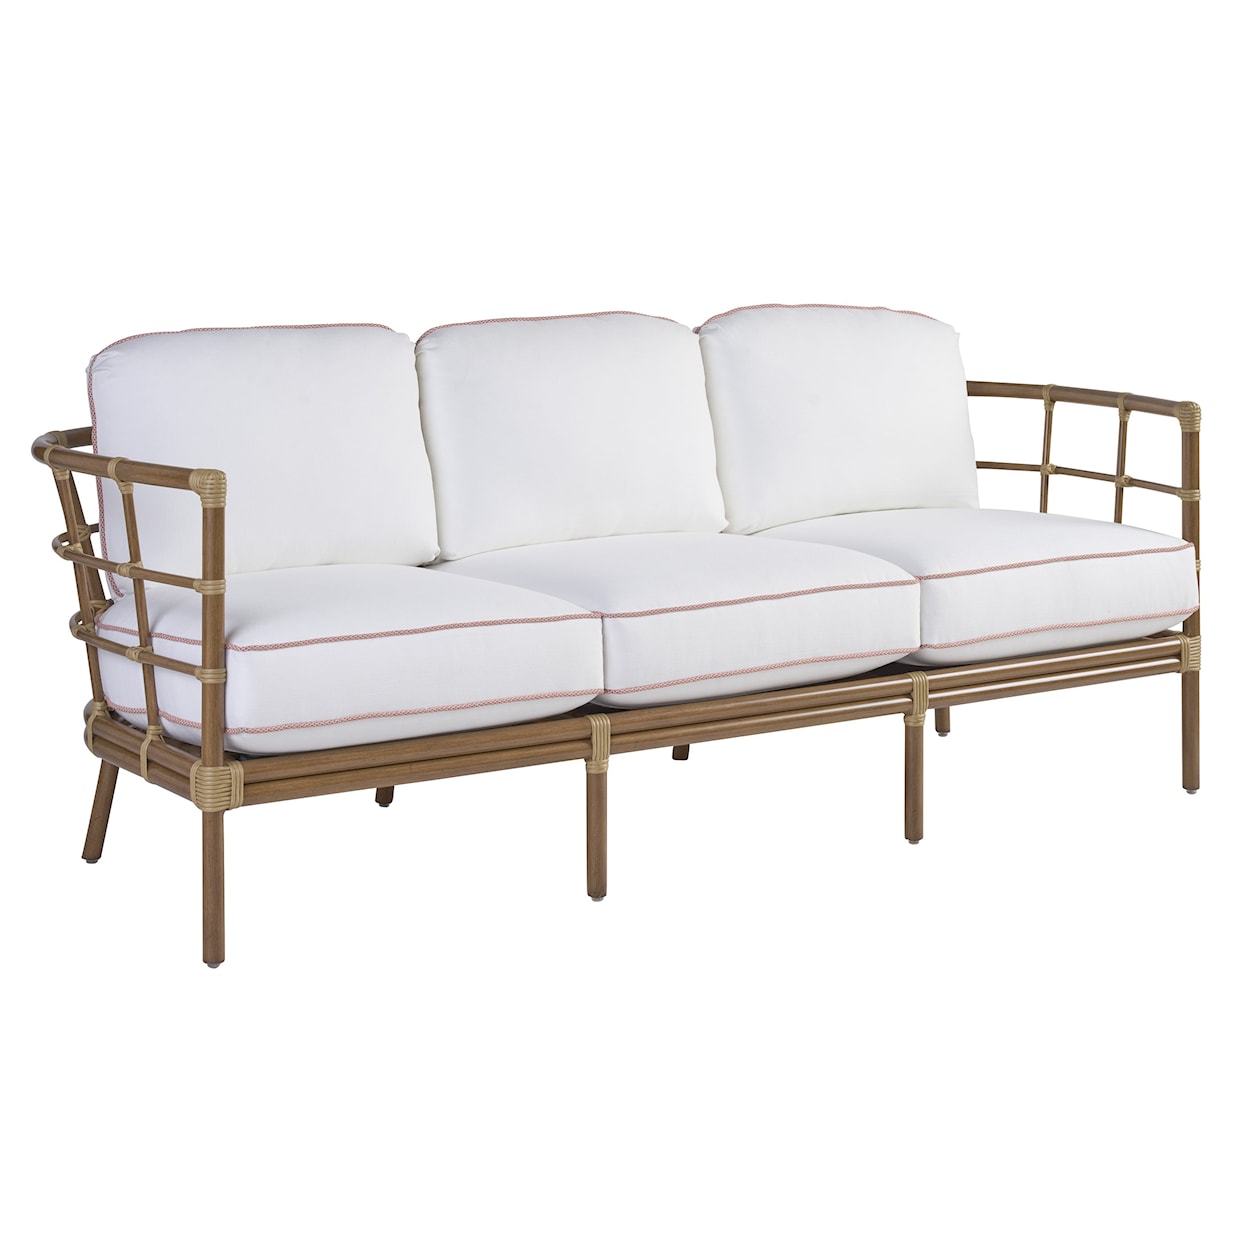 Tommy Bahama Outdoor Living Sandpiper Bay Outdoor Sofa with Curved Arms